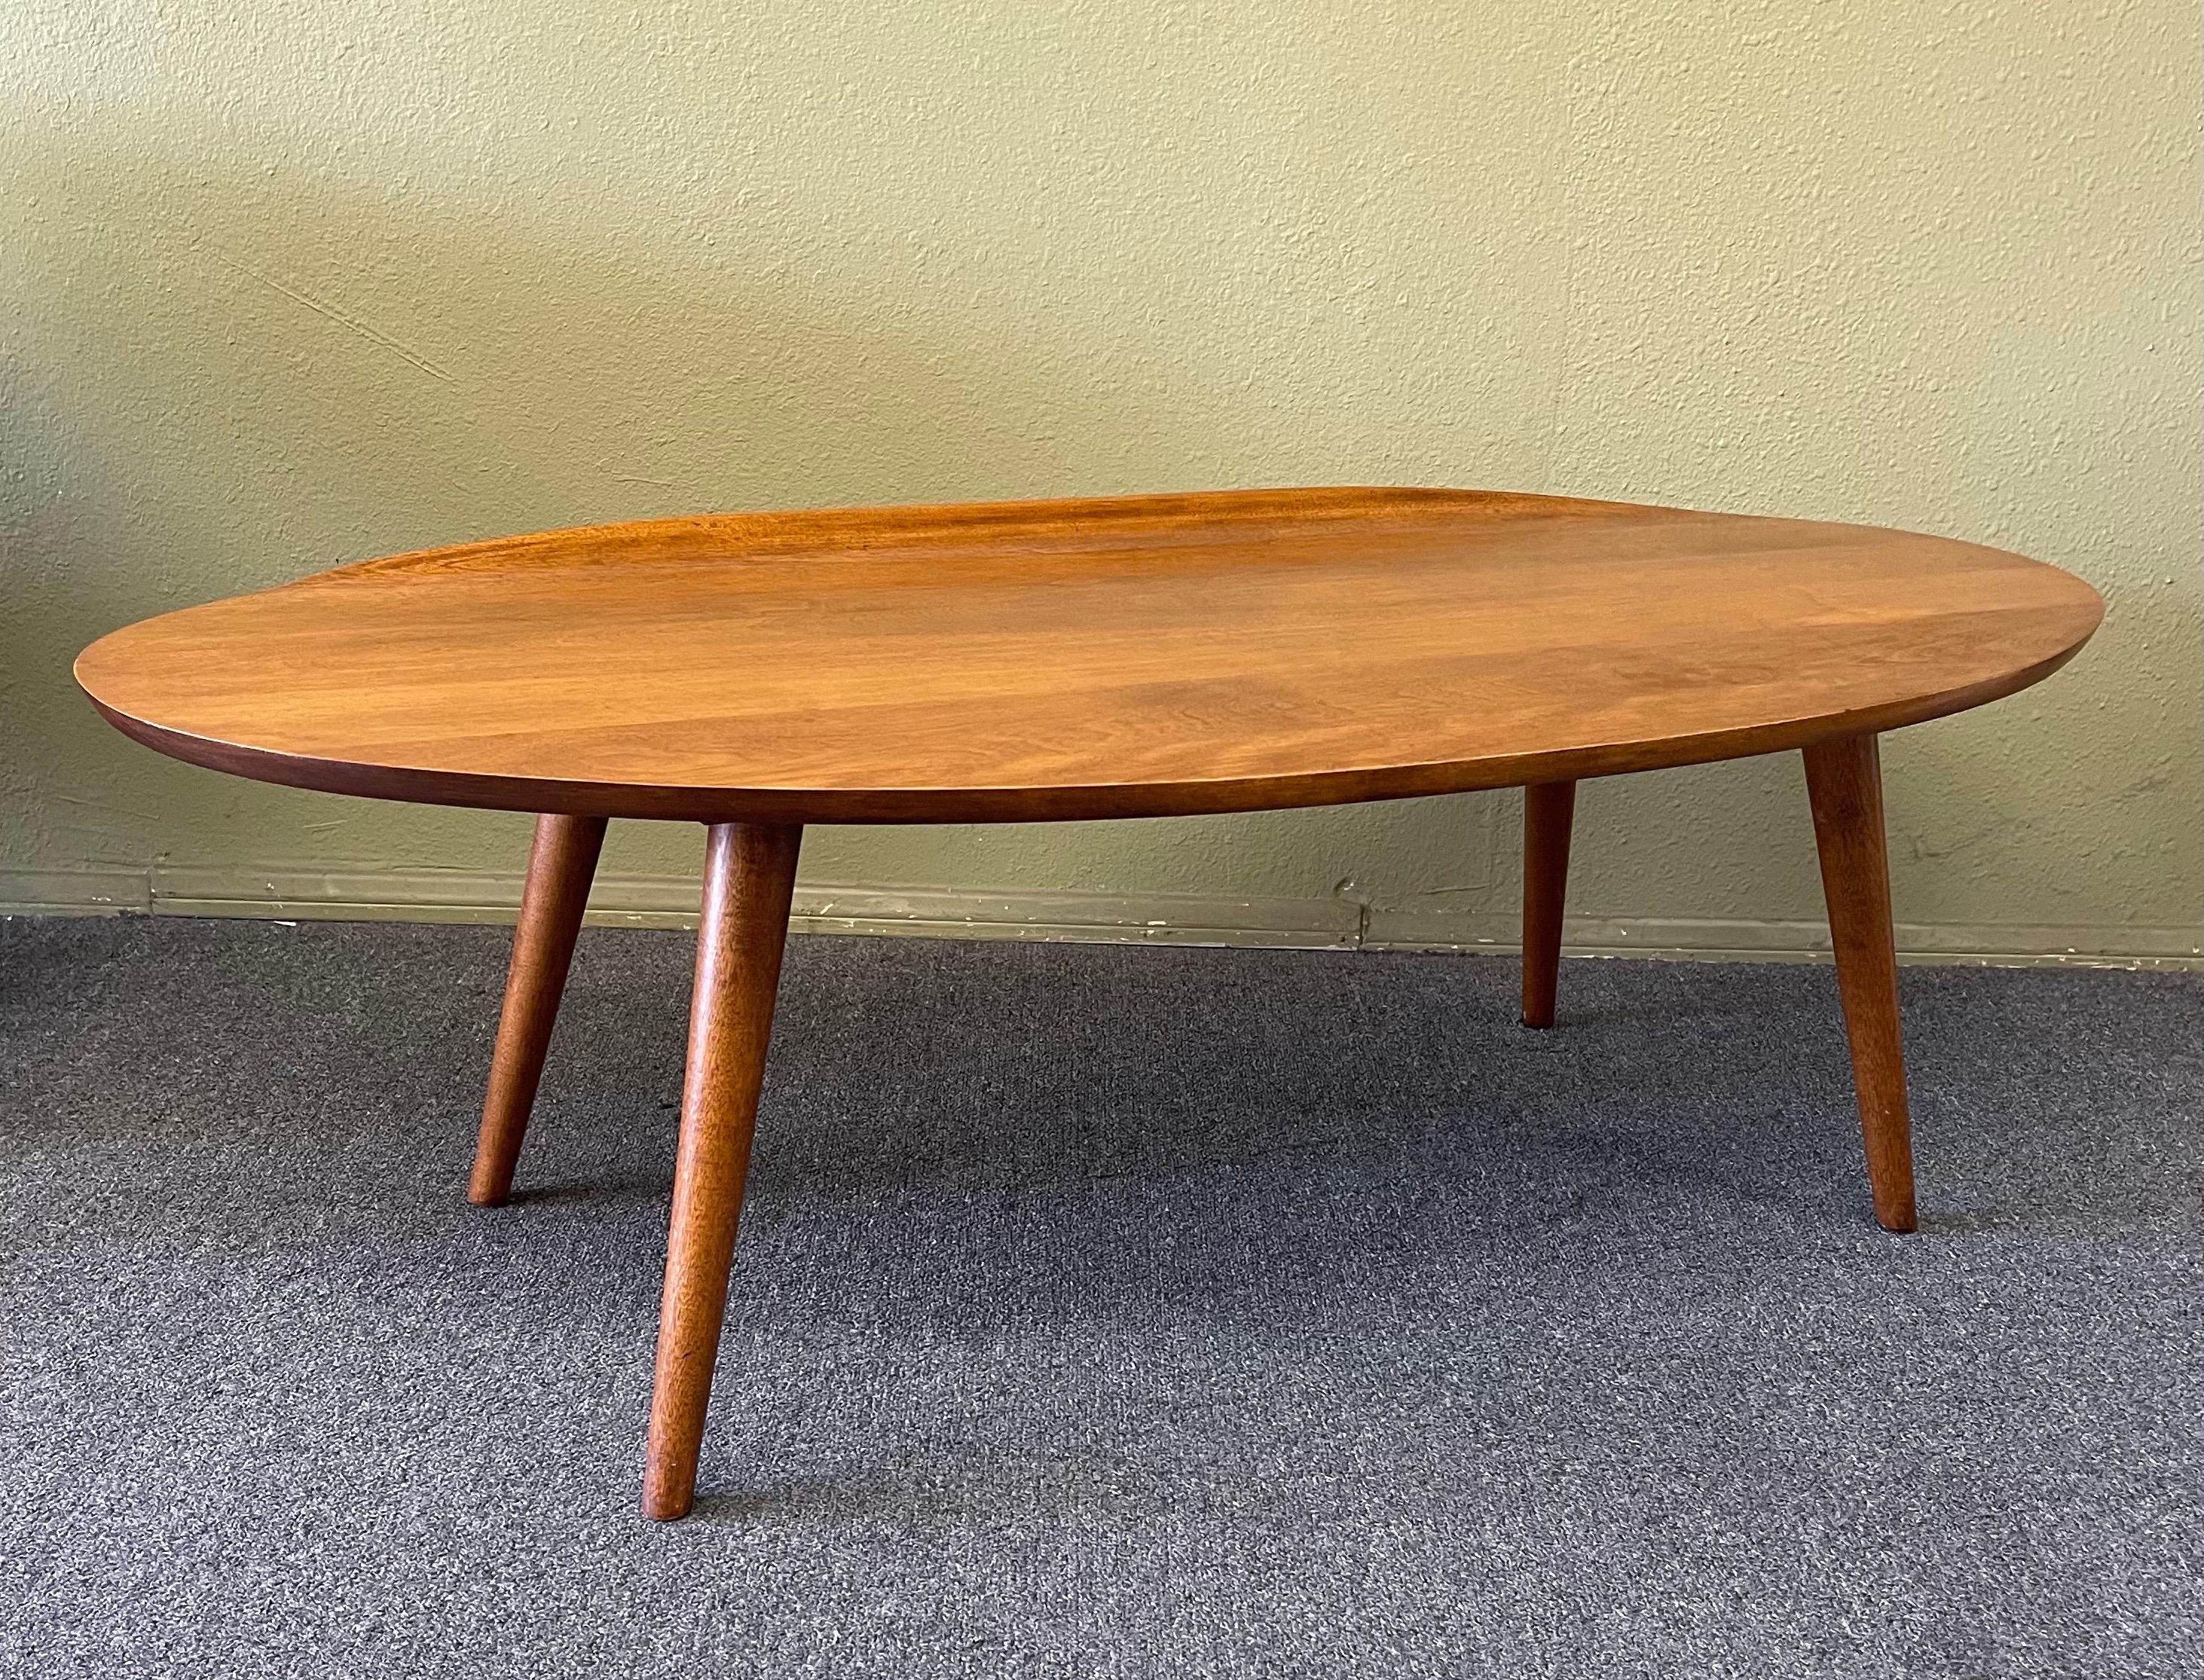 Gorgeous Mid-Century Modern surfboard coffee table by Russel Wright for Conant Ball, circa 1950s. The table has been professionally refinished and is in excellent condition. The piece is made of maple wood, has a curved edge on one side and measures